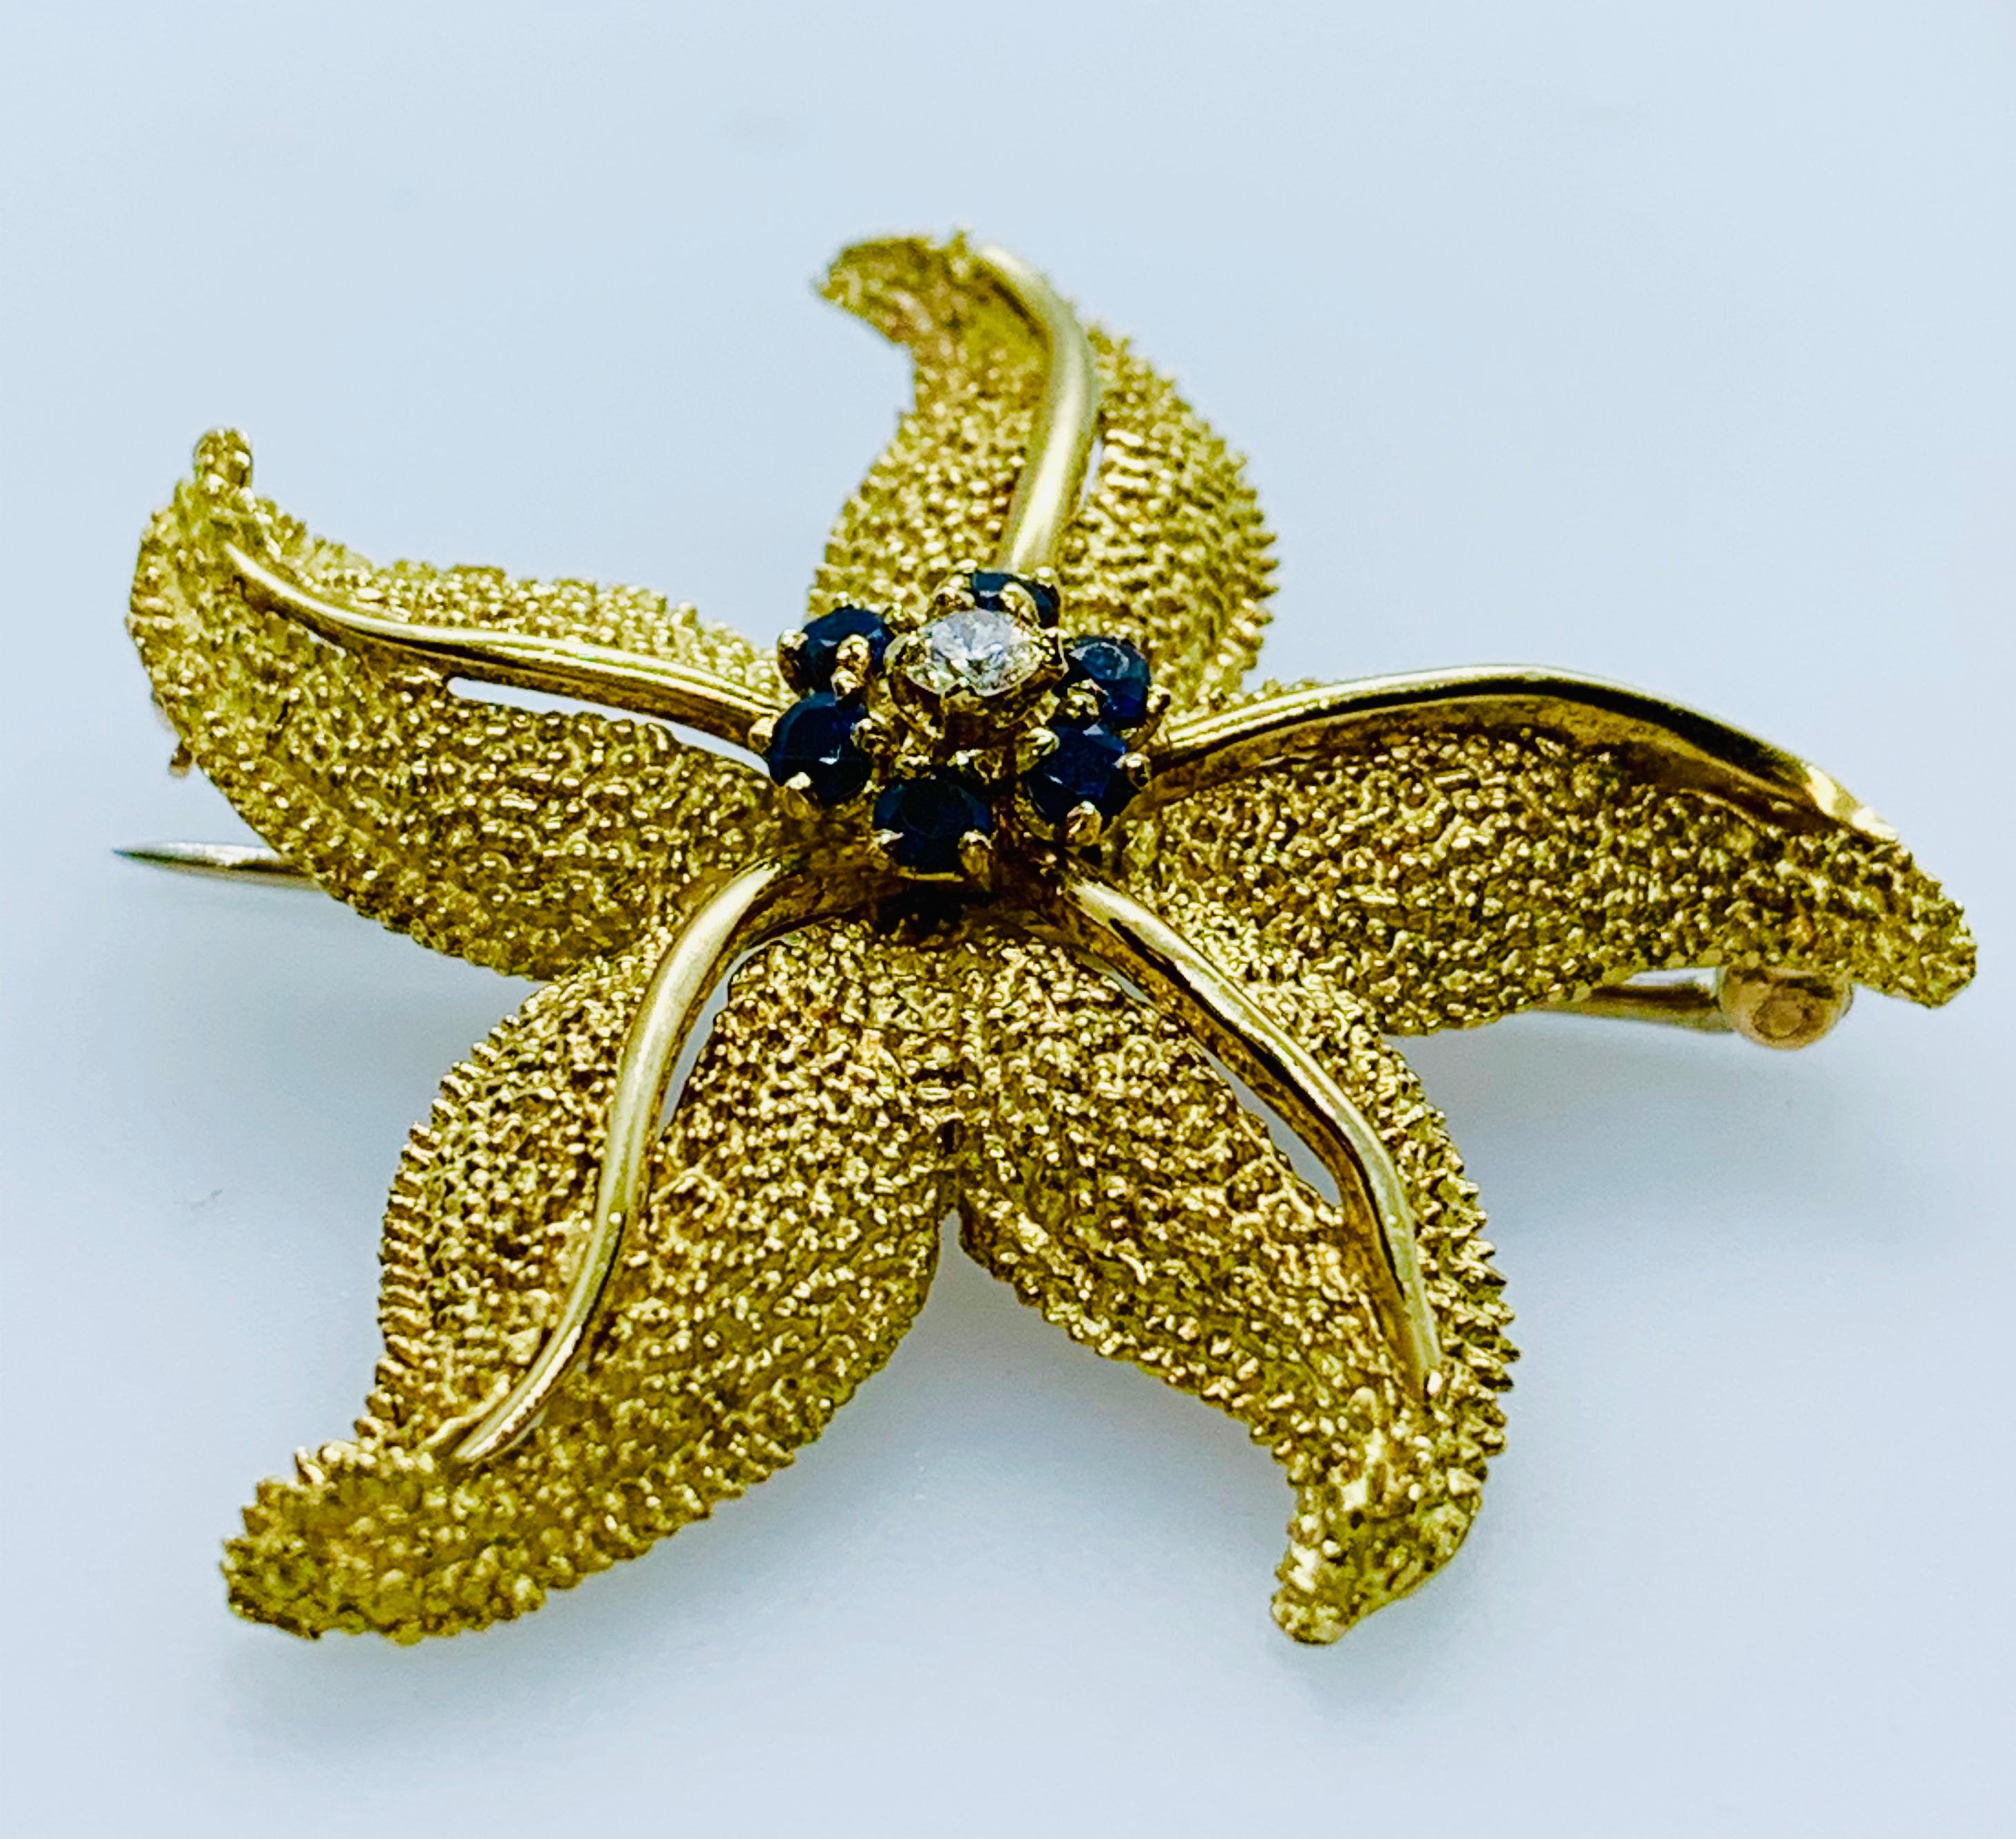 Beautiful Vintage Starfish Brooch! It is made in 18K yellow Gold with a granulated finish mimicking the starfish's texture. At the center of the brooch is a 0.08 carat Brilliant Diamond that is surrounded by 6 round blue sapphires. The brooch